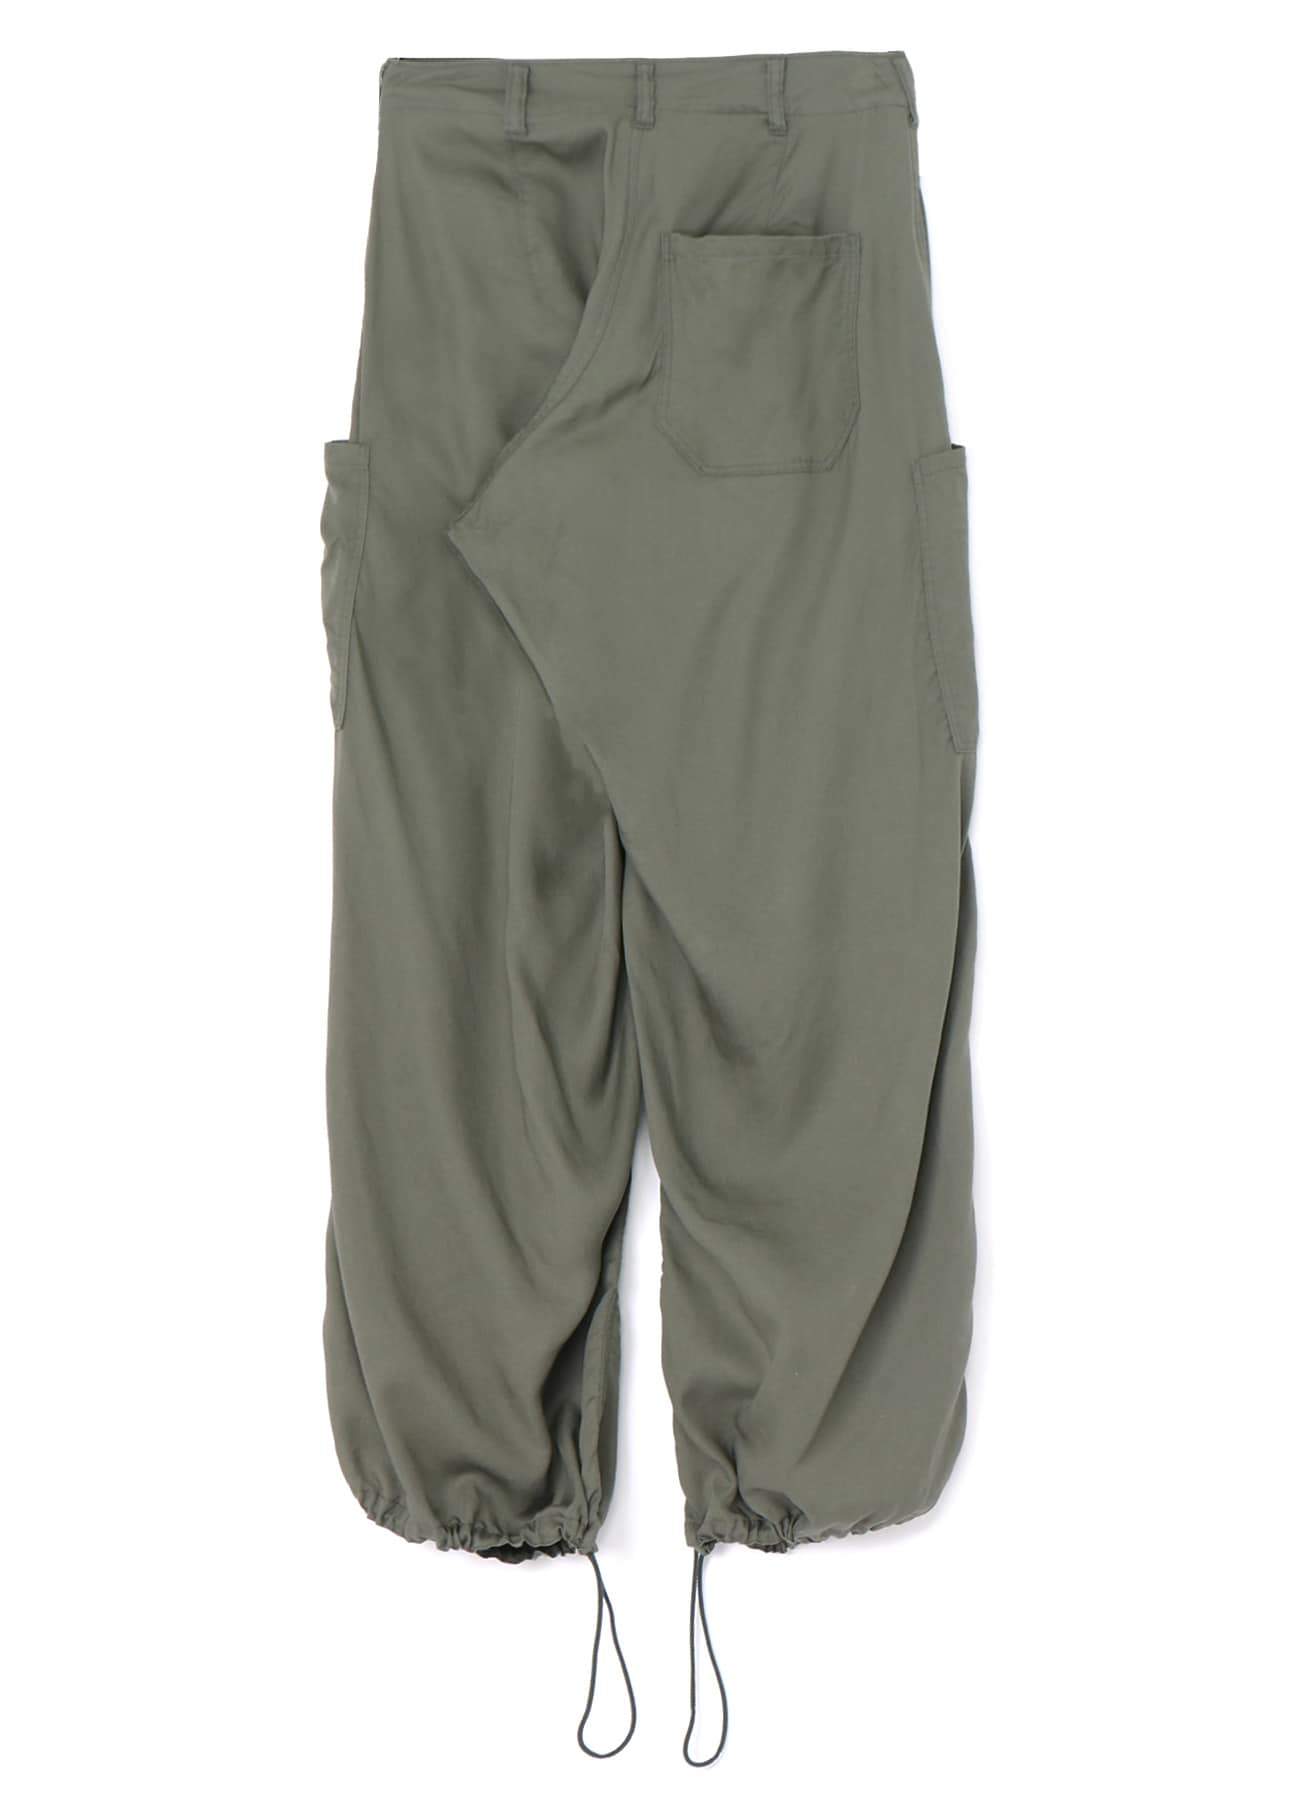 PRODUCT DYED TWILL DRAWCORD PANTS(S Khaki): LIMI feu｜THE SHOP 